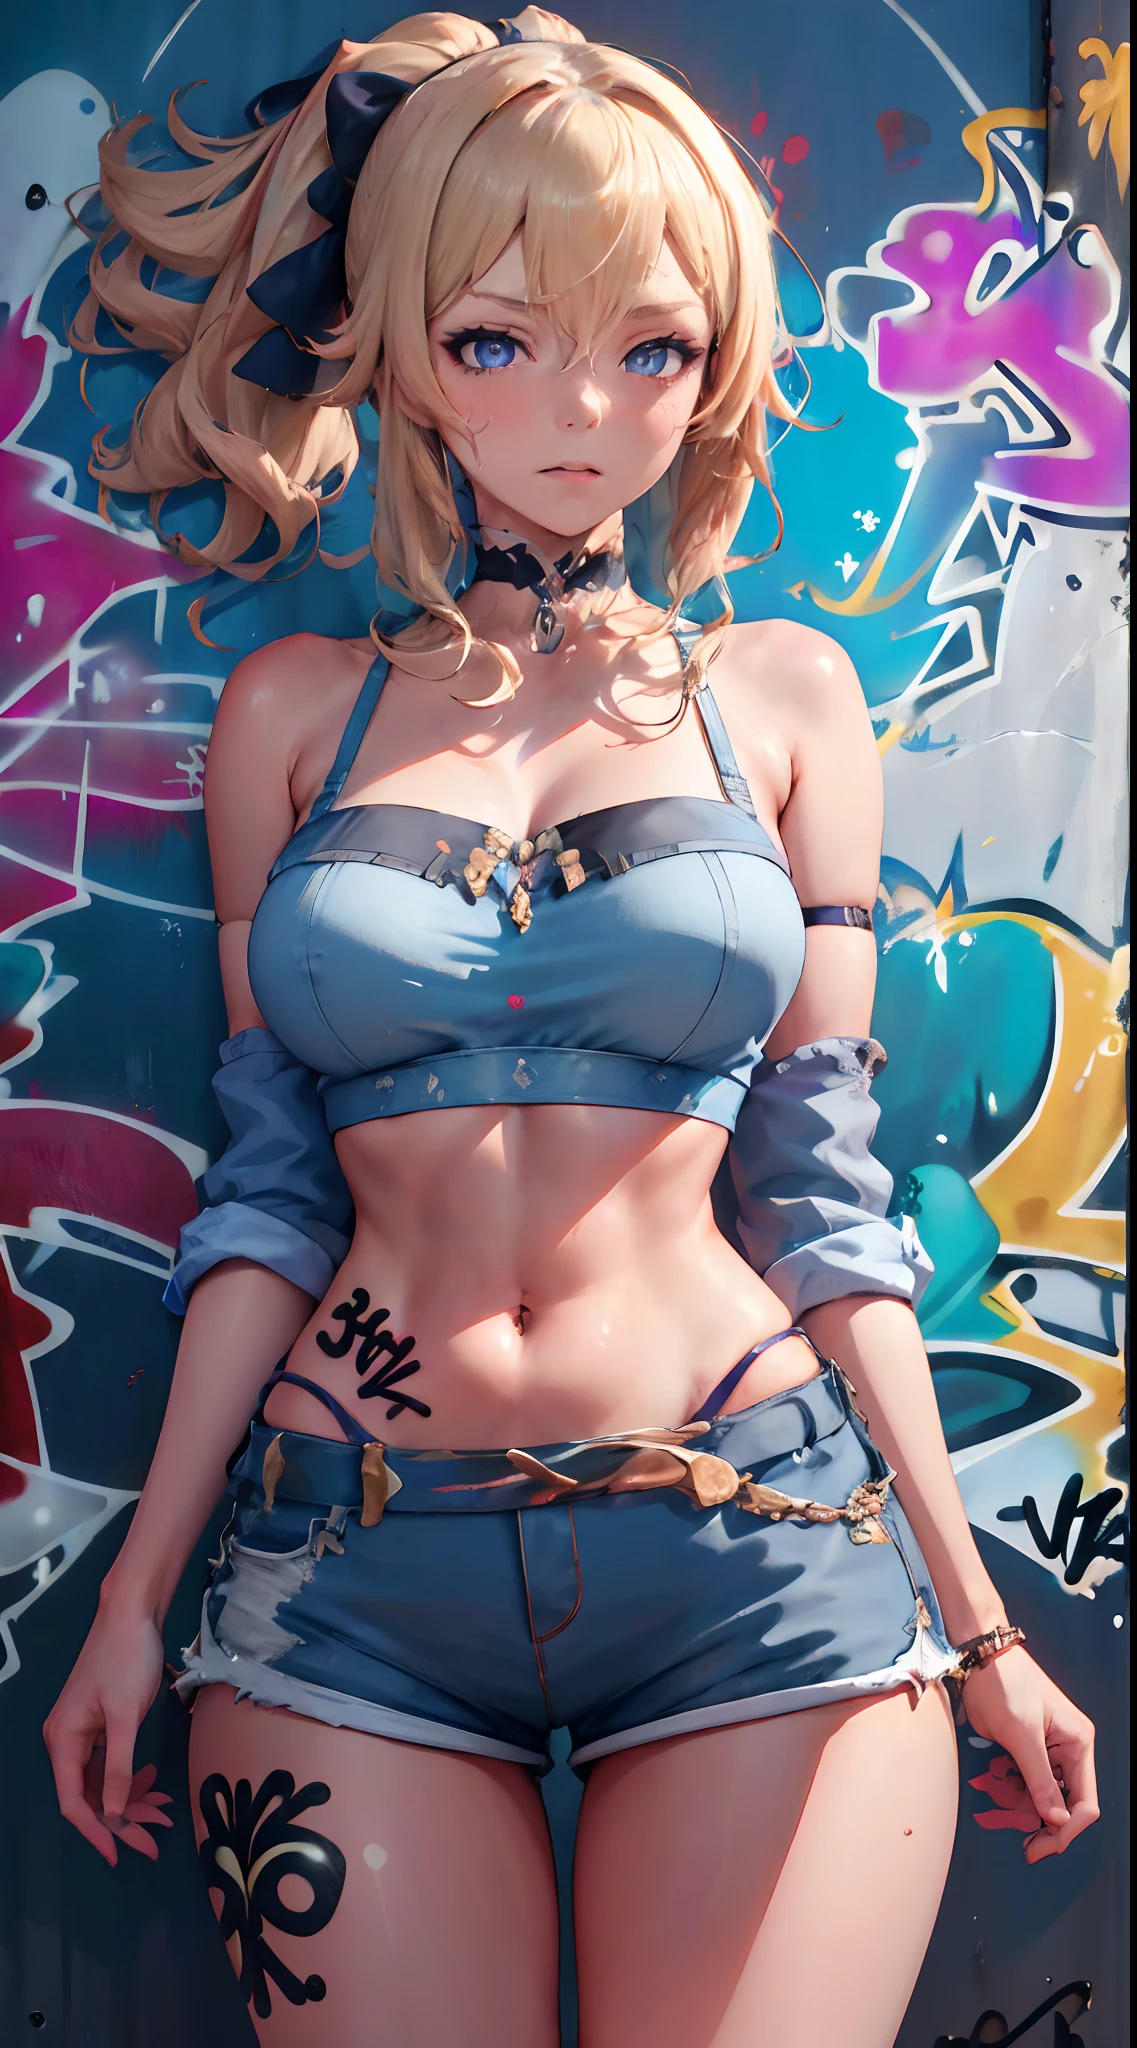 Jean Genshin Effect, master-piece, bestquality, 1girls,25 years old, shorts jeans, oversized breasts, ,bara, crop top, shorts jeans, choker, (Graffiti:1.5), Splash with purple lightning pattern., arm behind back, against wall, View viewers from the front., Thigh strap, Head tilt, bored, water eyes,